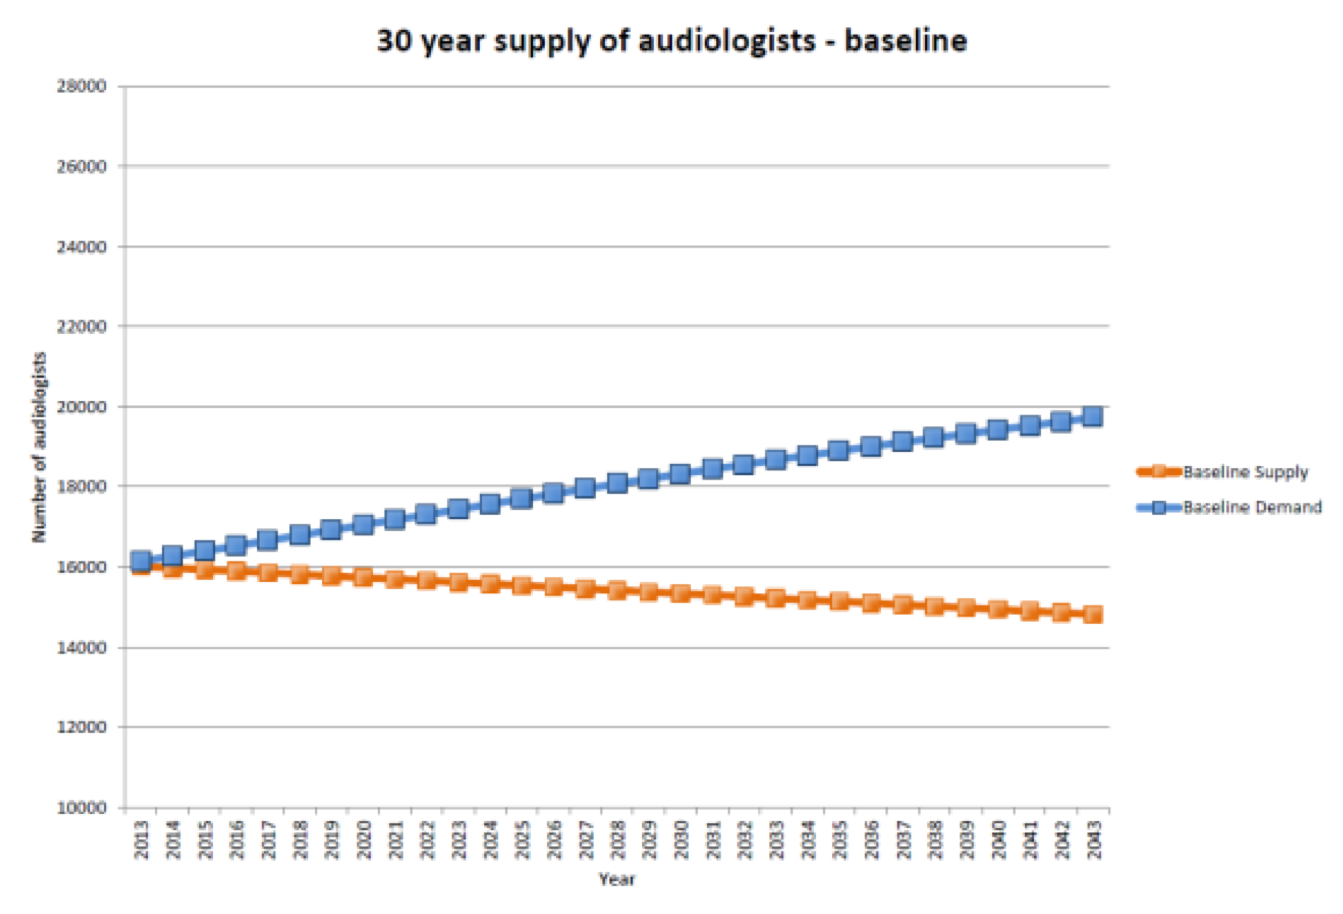 Supply of audiologists versus demand for treatment over the next 30 years